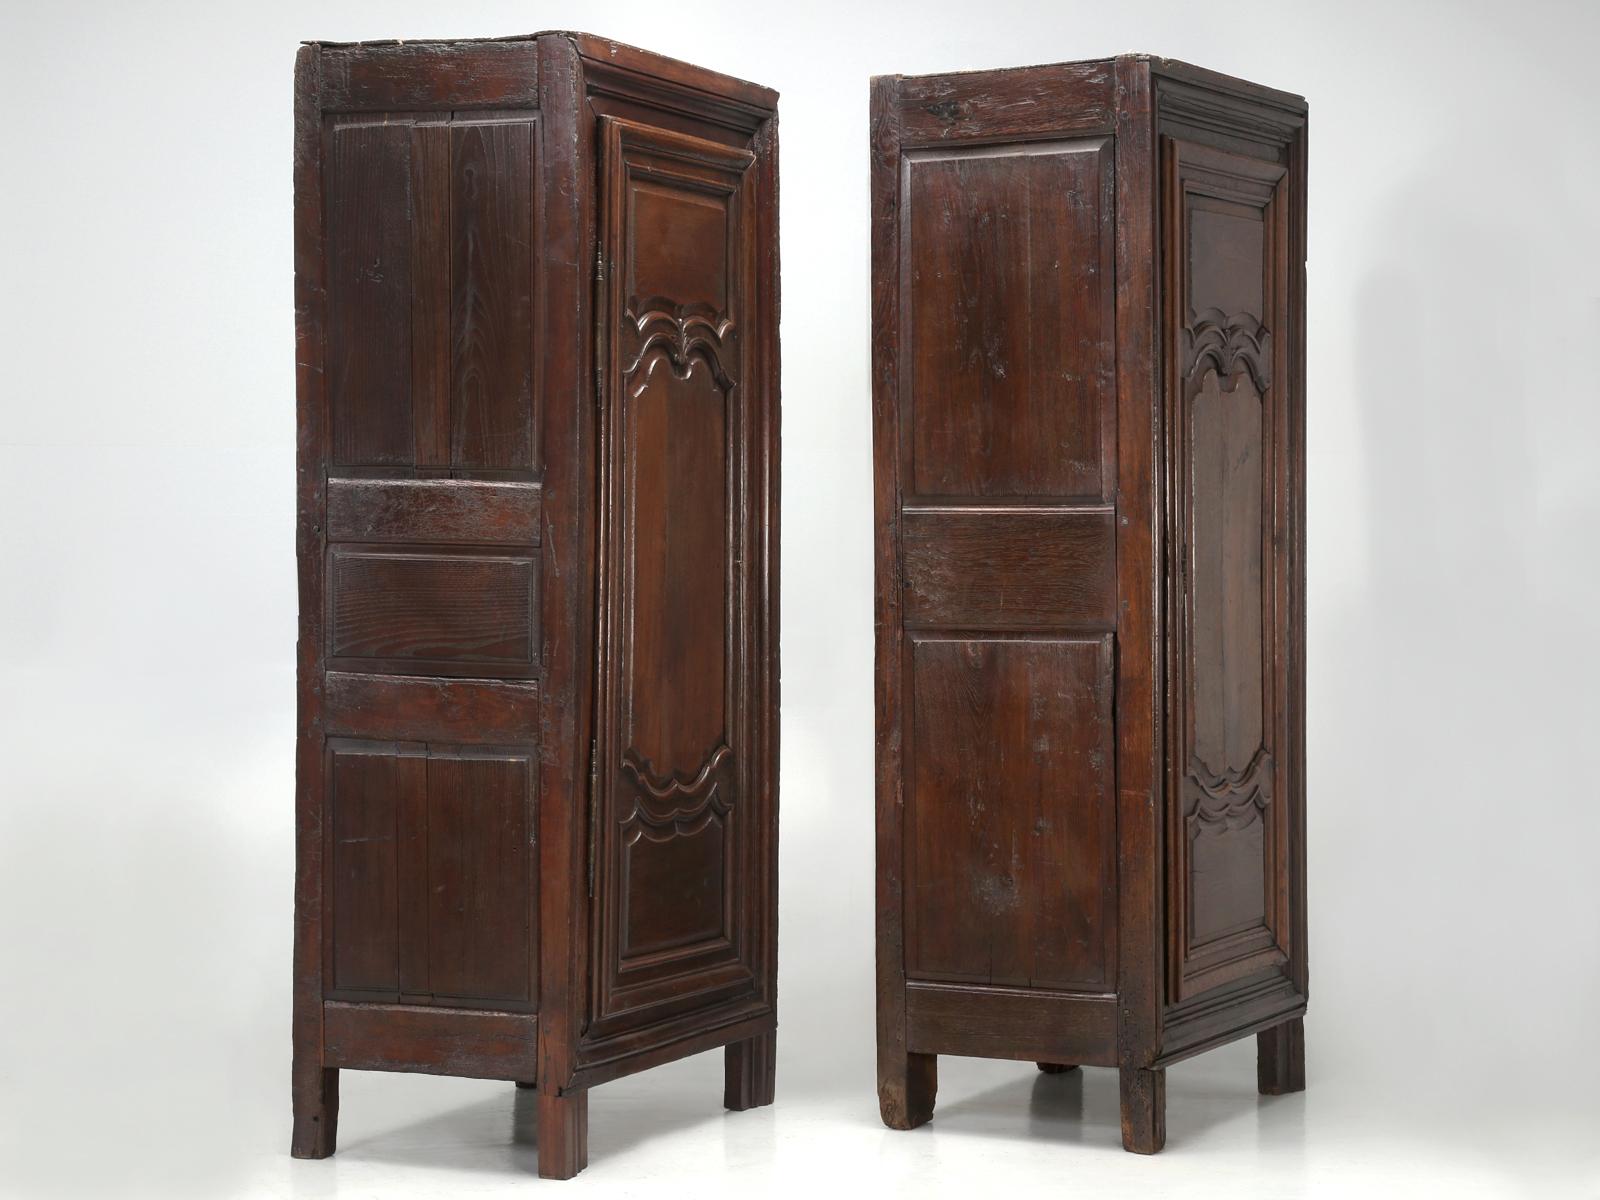 One wonders how a pair of Louis XIII 250-year-old French bonnetieres, cupboards, armoires or what have you, could possibly stay together that long, without be separated? We instructed our Old Plank restoration department, not to over restore the